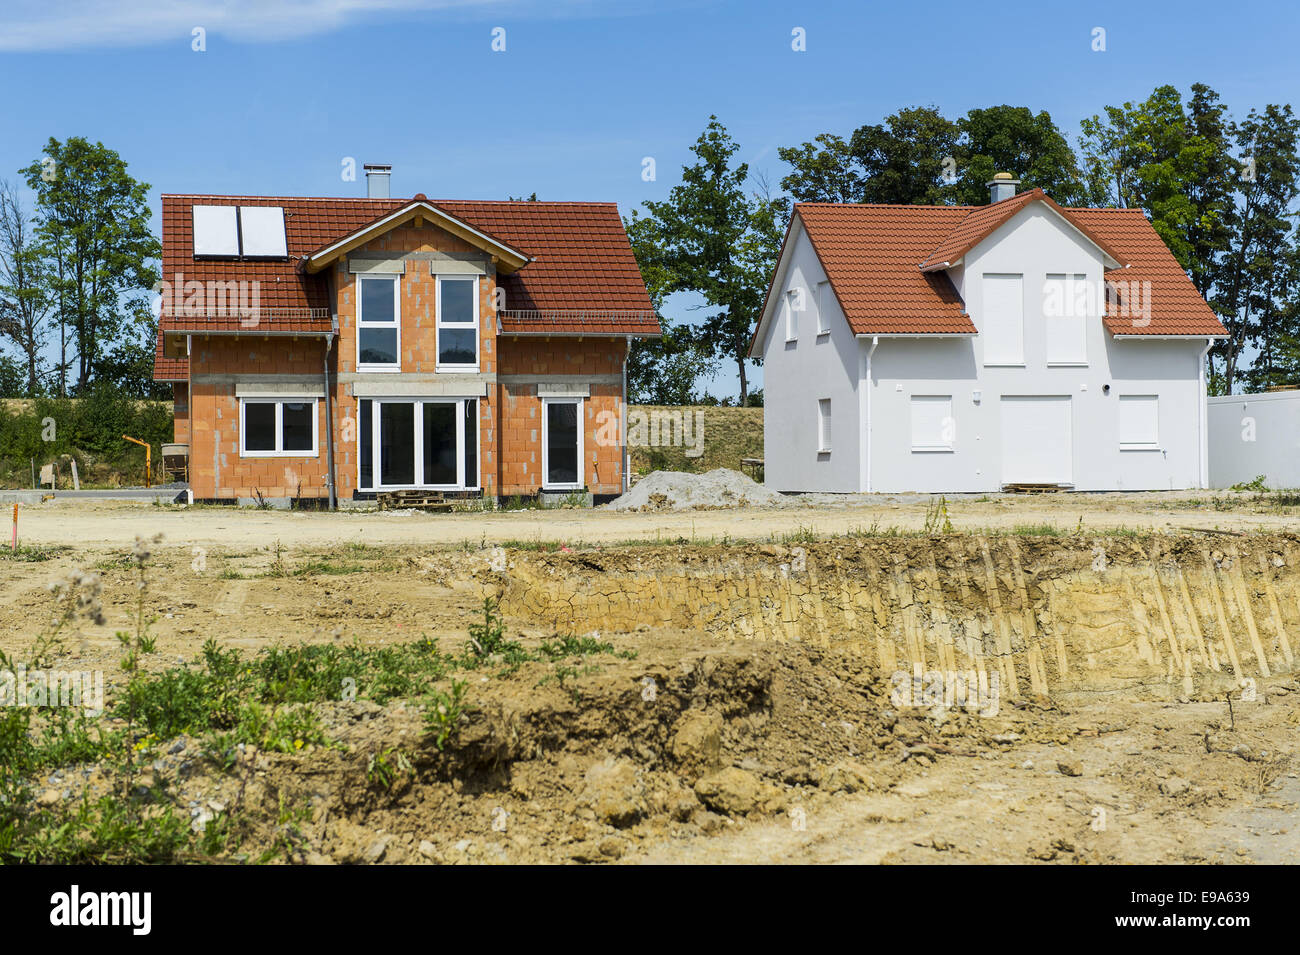 Development area of a residential area Stock Photo